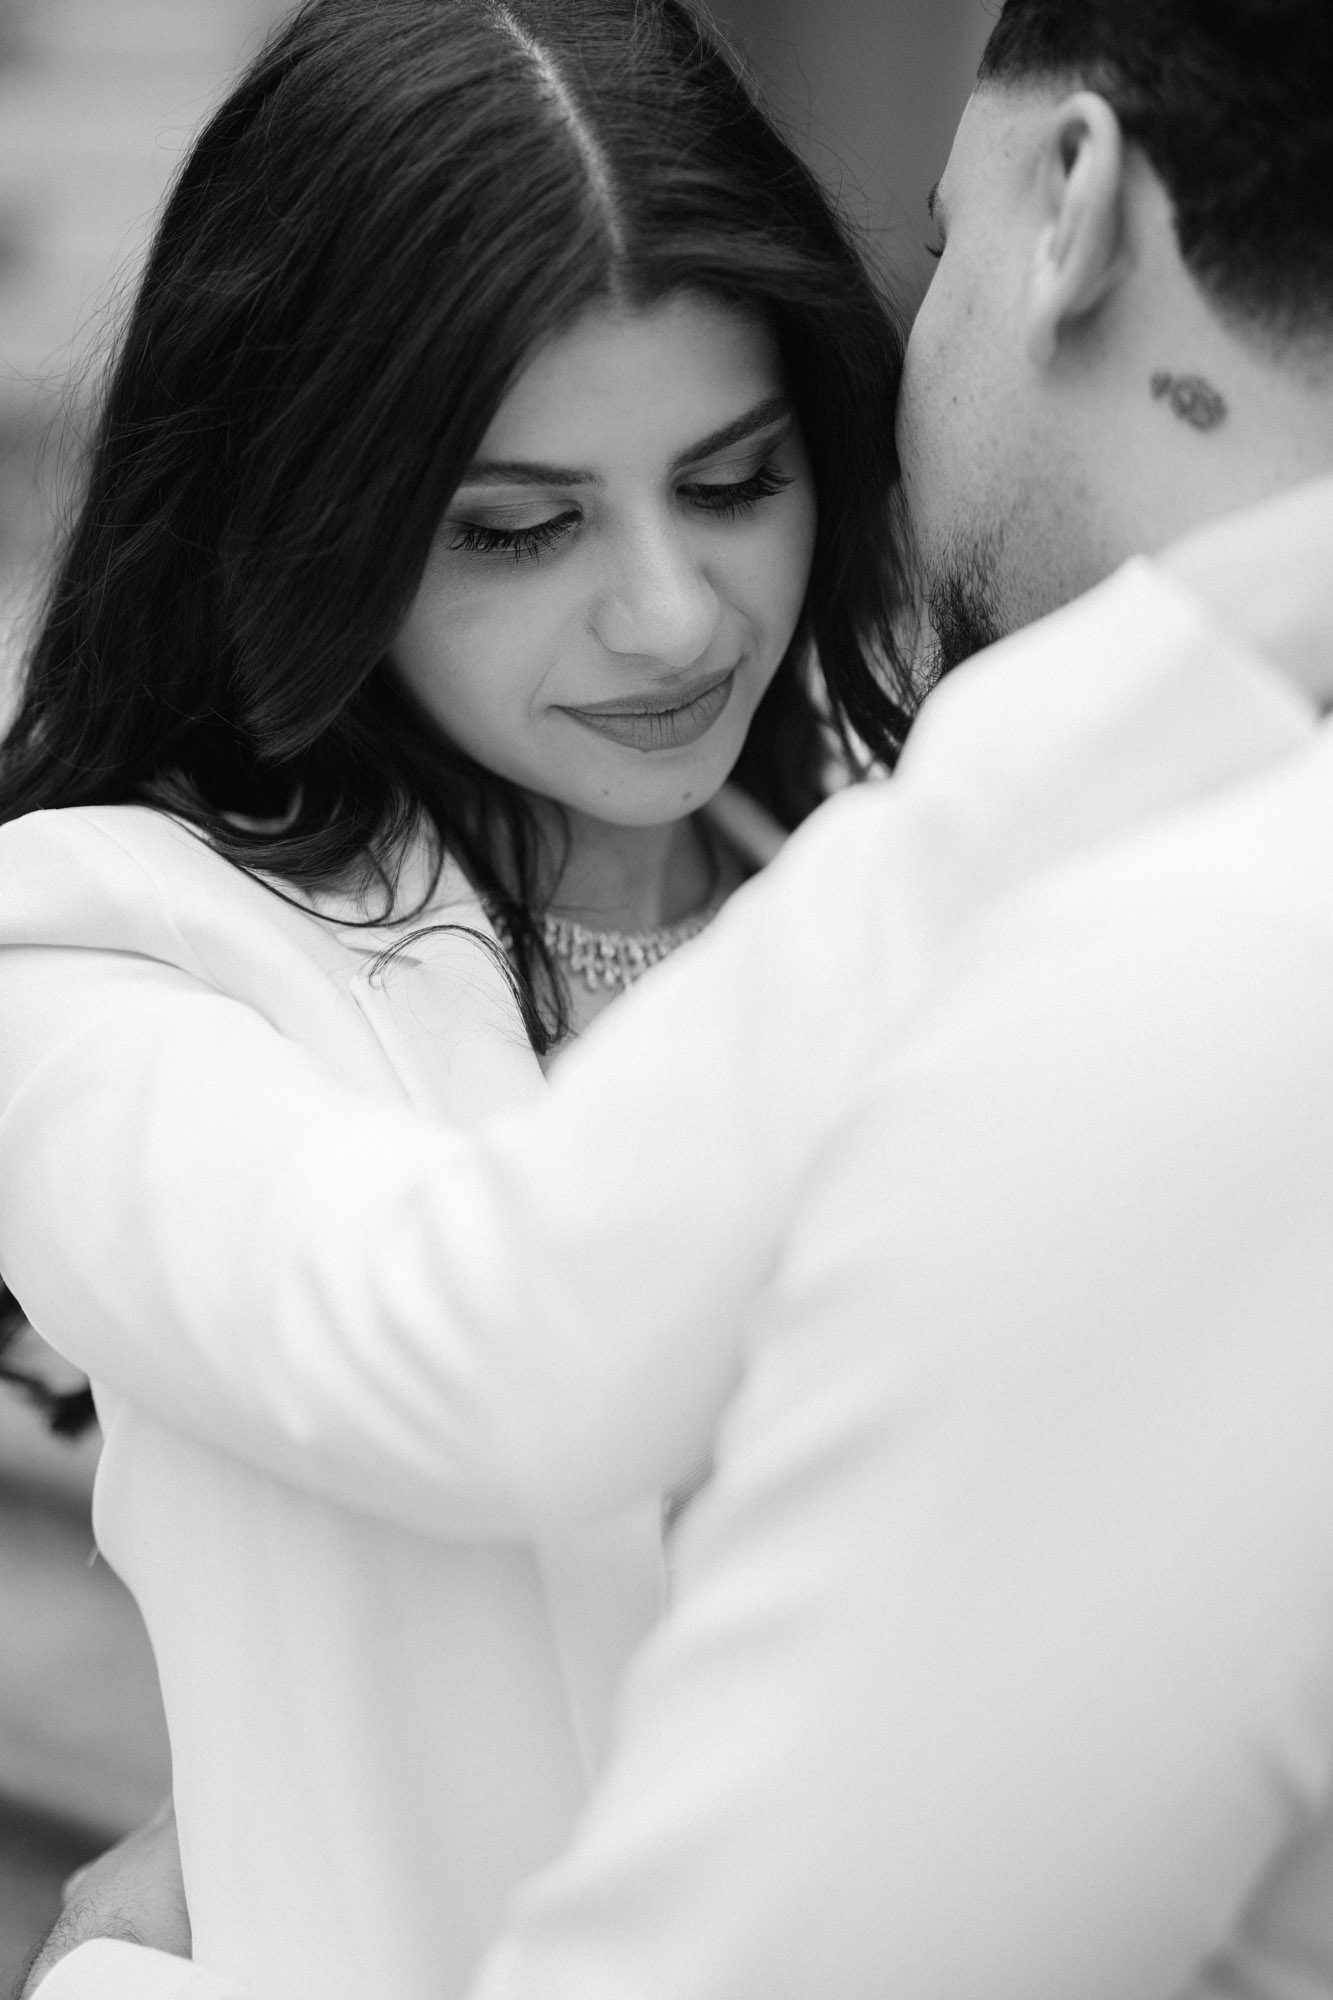 Black and white photo of groom-to-be whispering into fiancé's ear